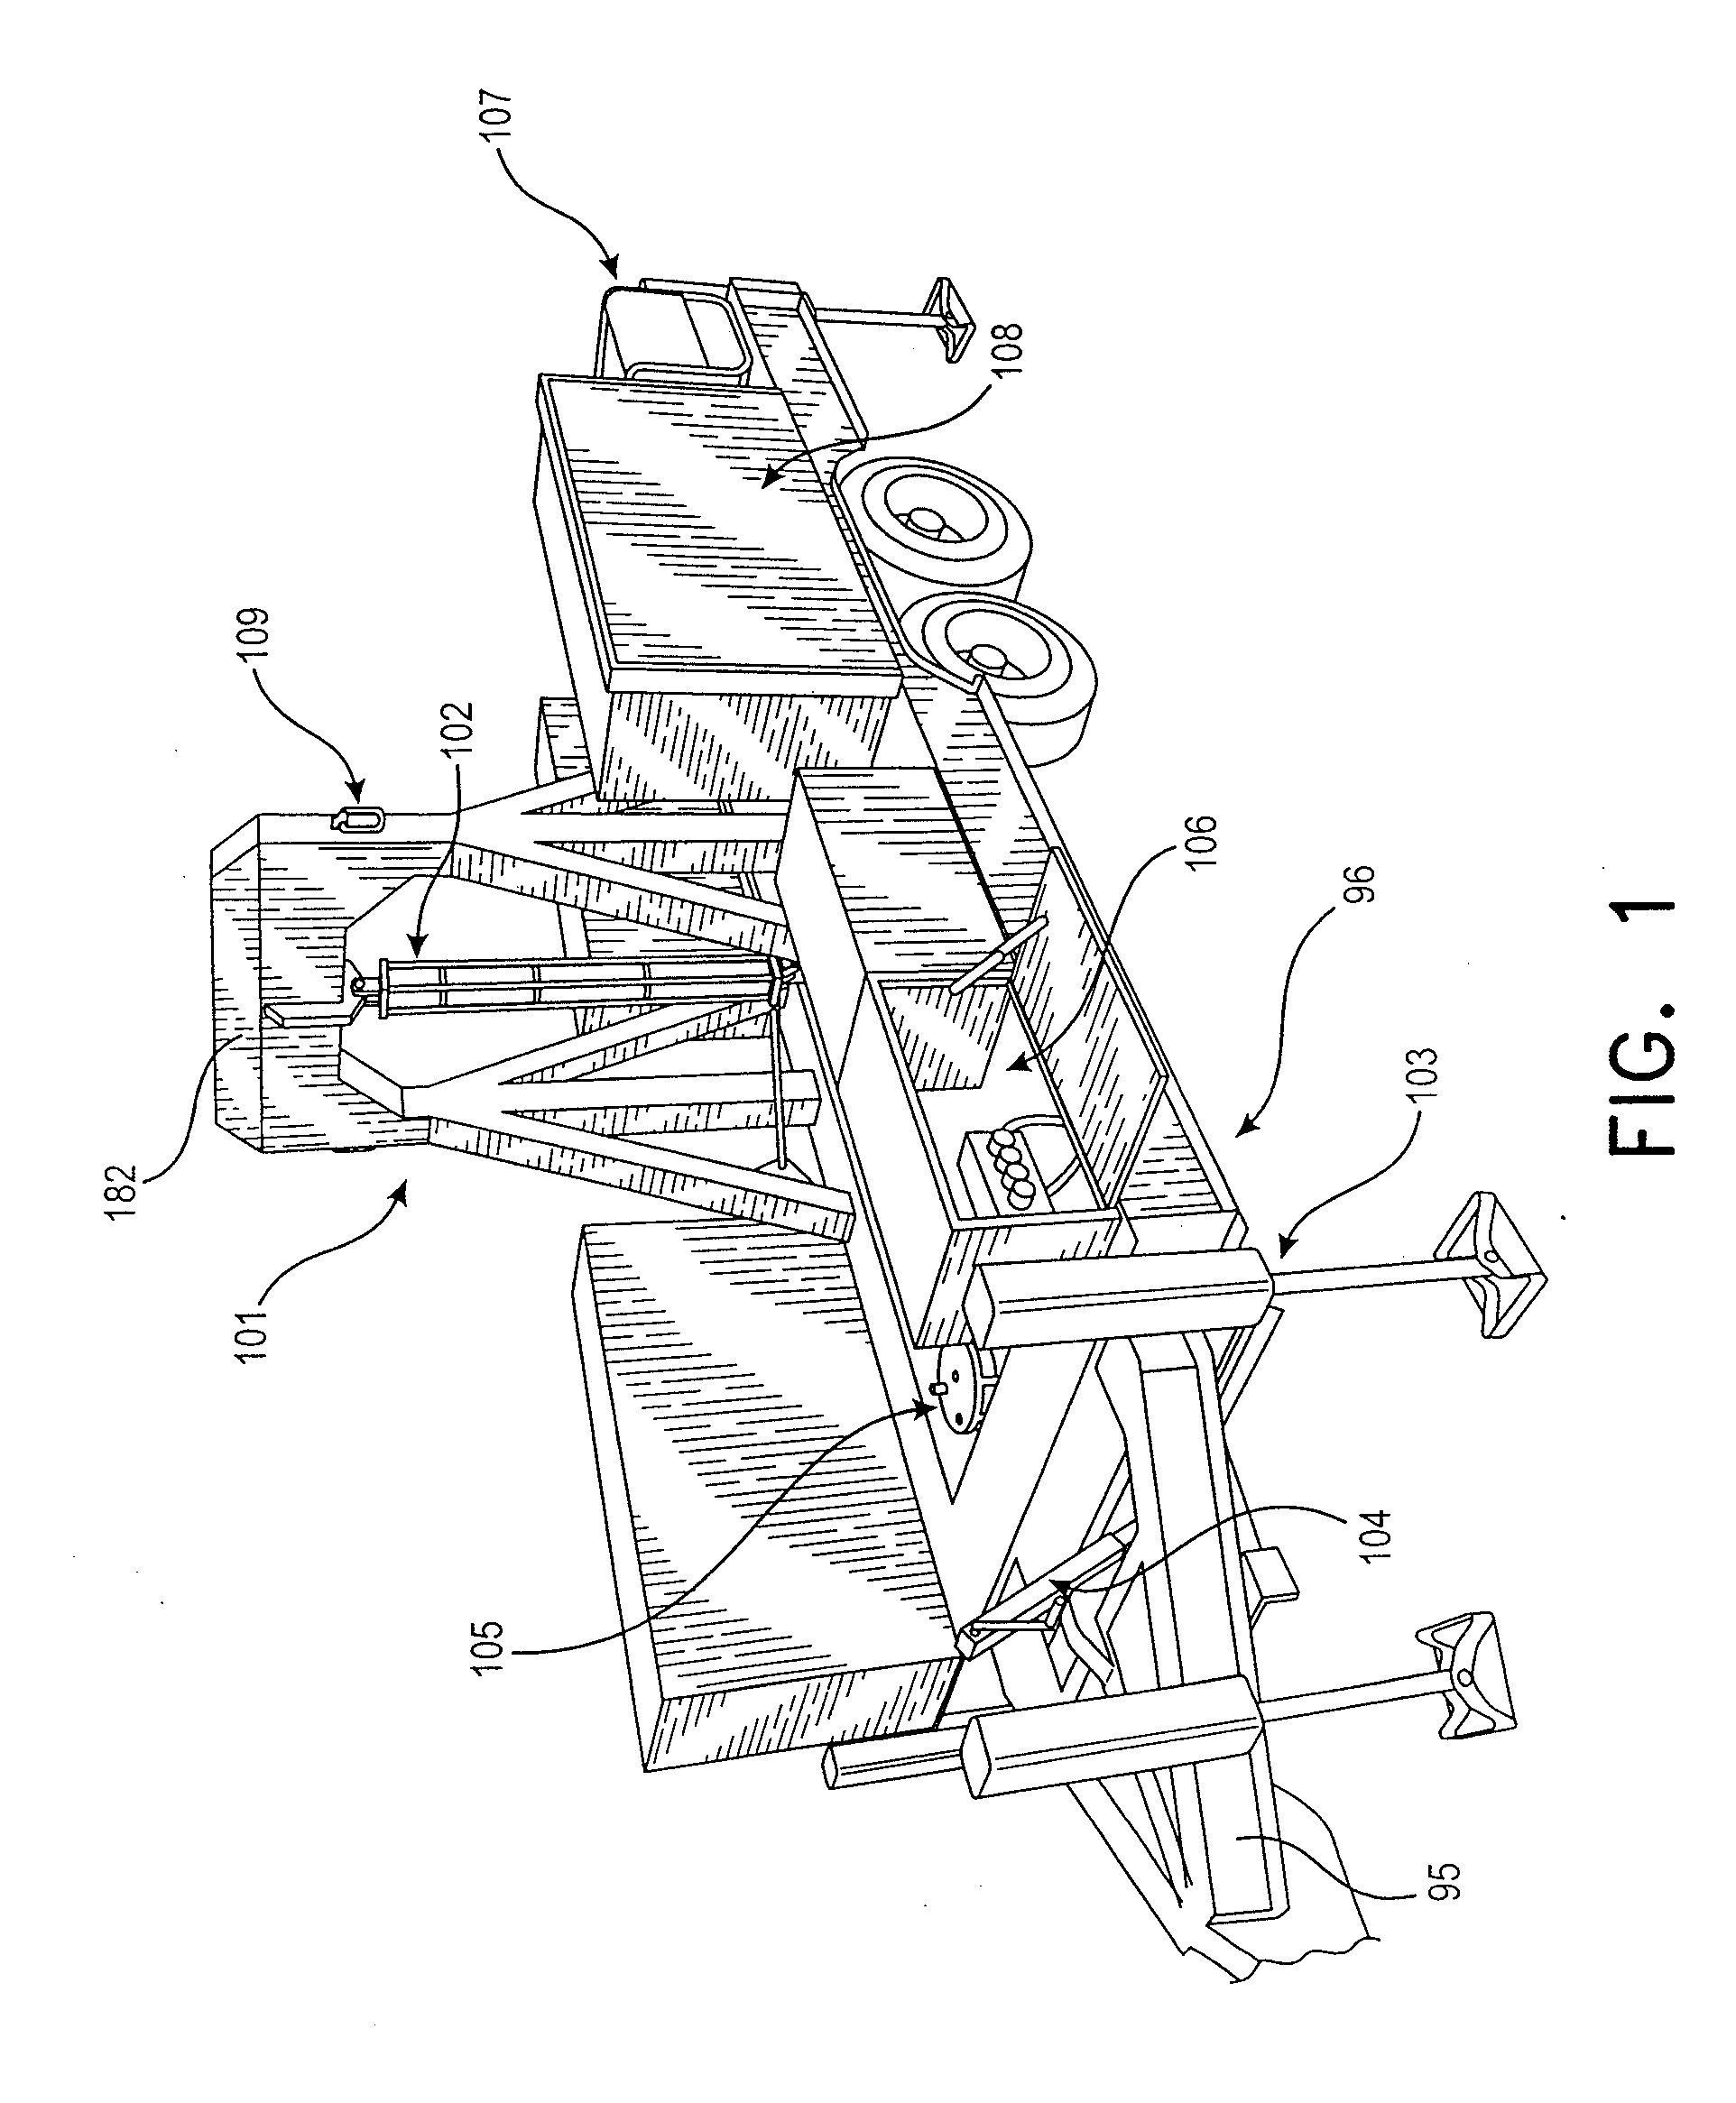 Mobile test system and methods for in situ characterization of stress and deflection dependent stiffness and bearing capacity of soils and geo-materials